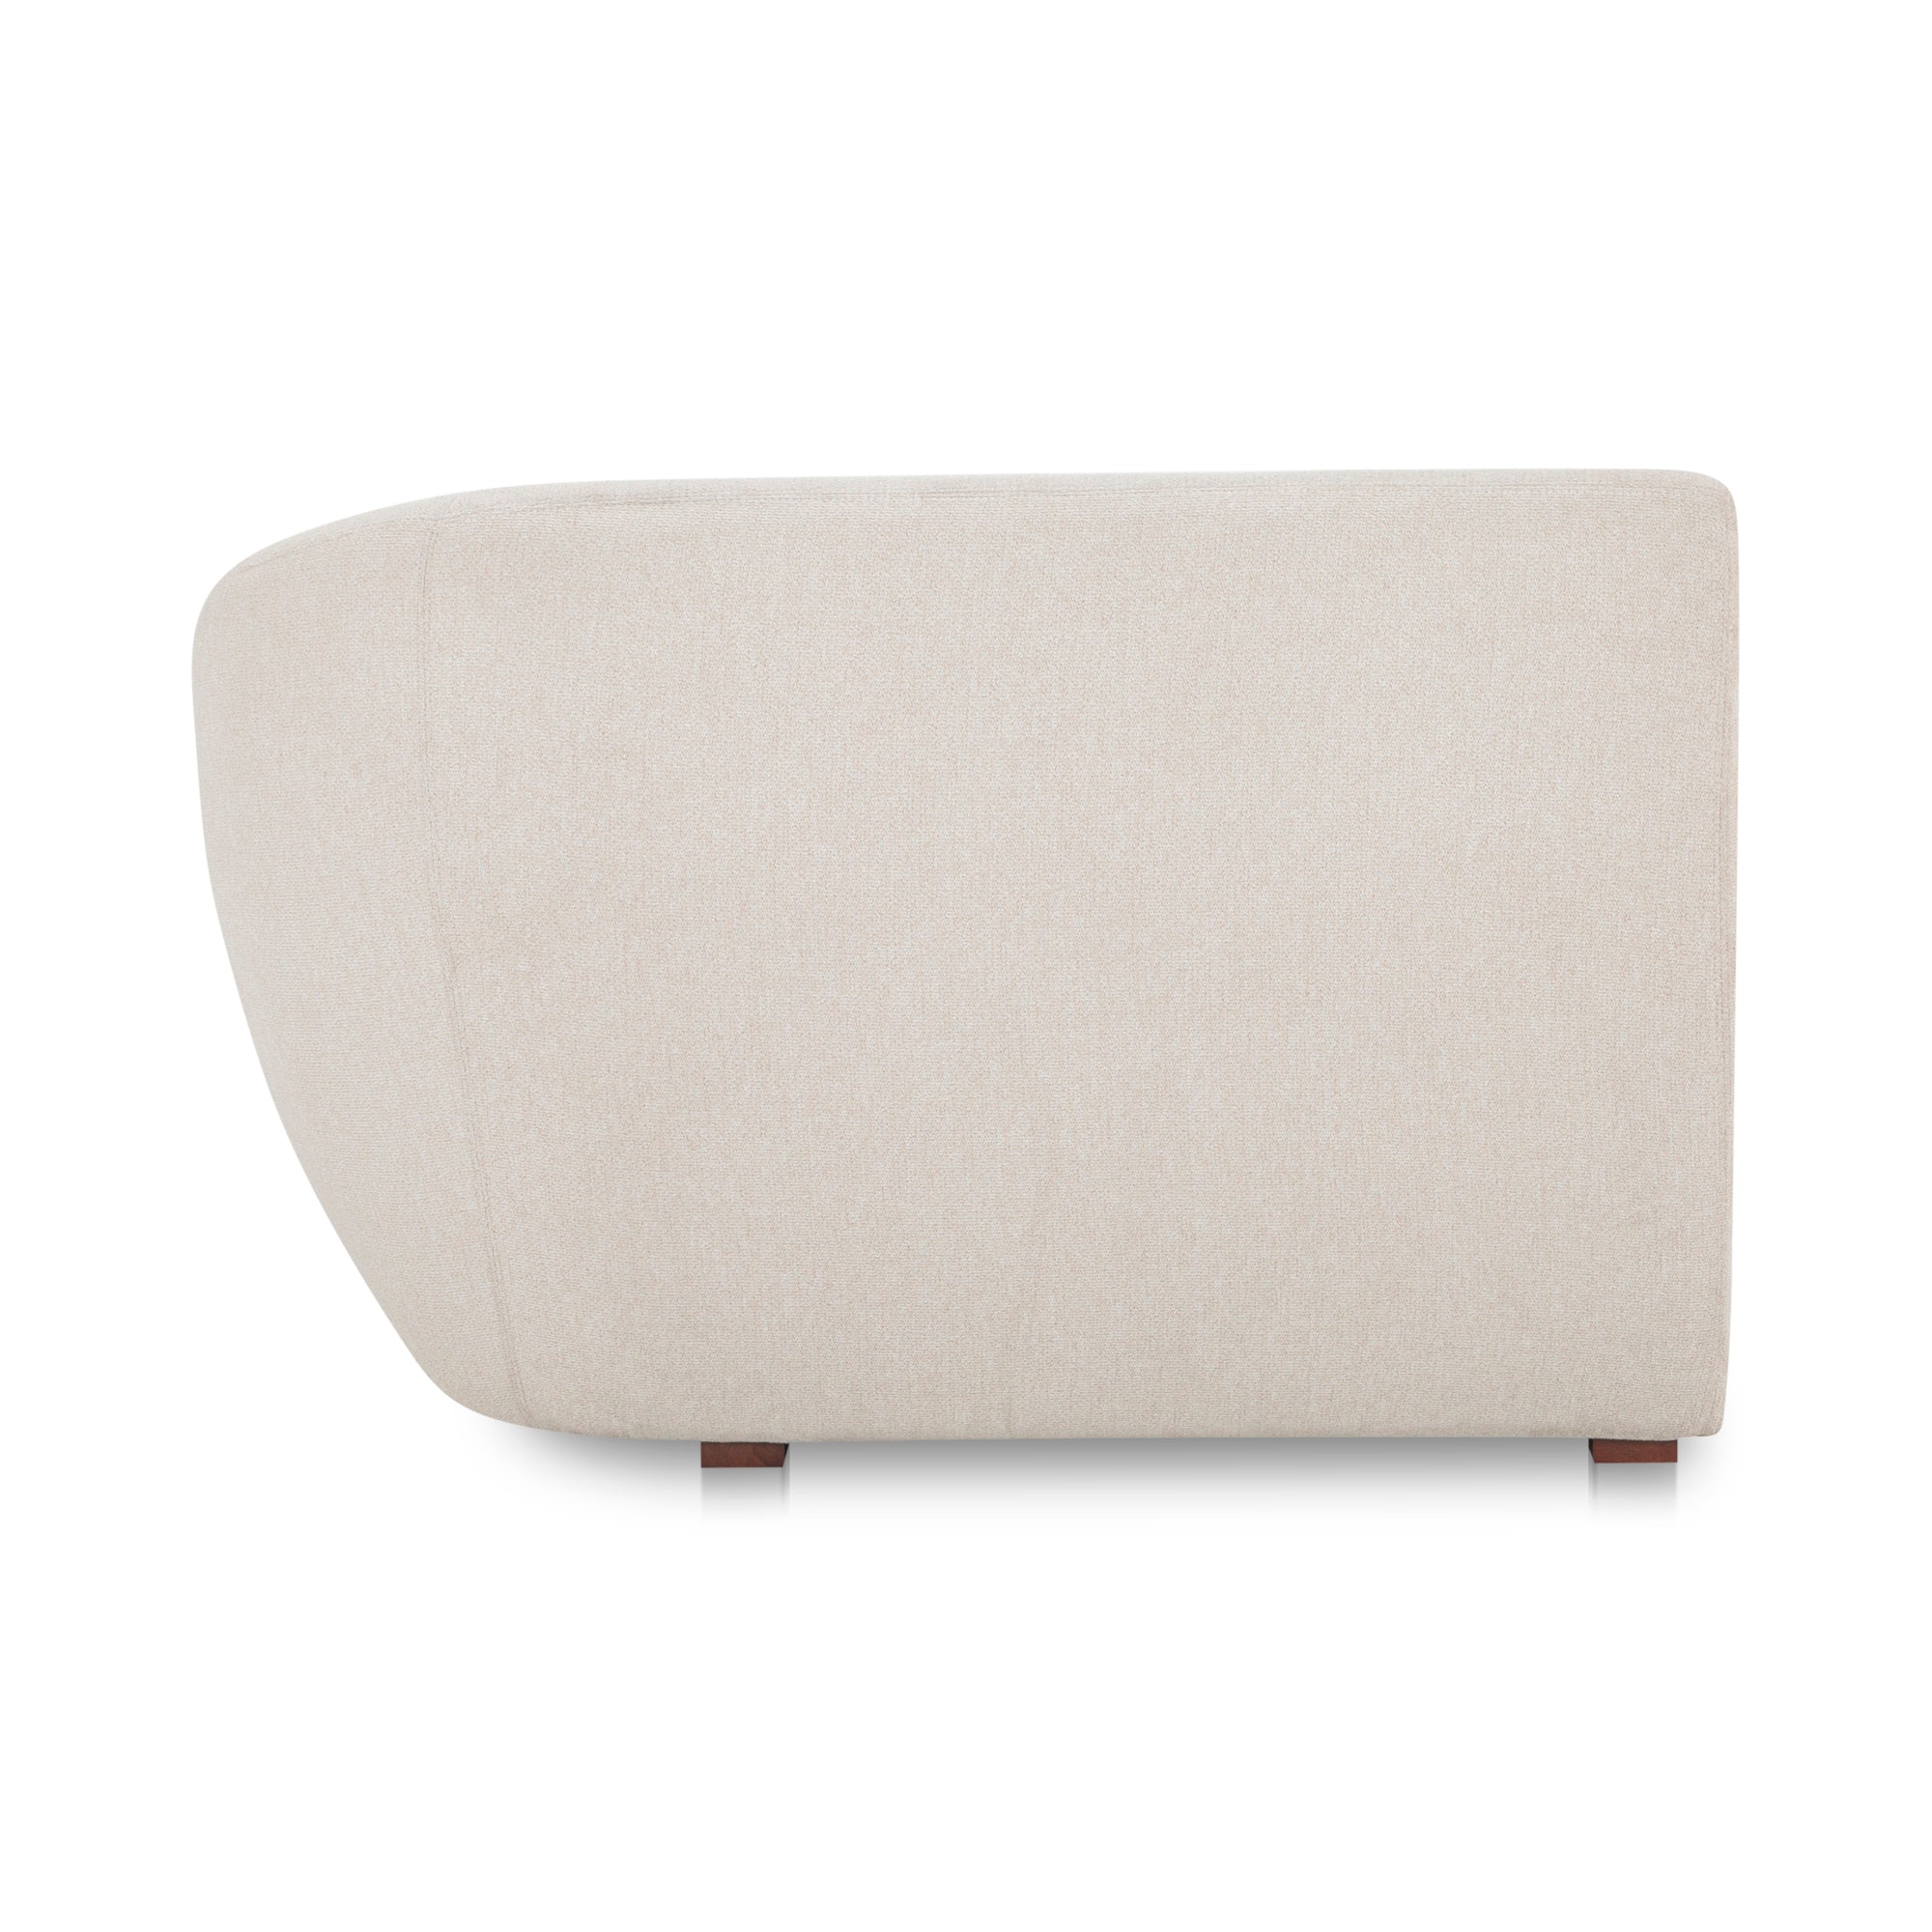 Amelia Right Arm Facing Chair Warm White